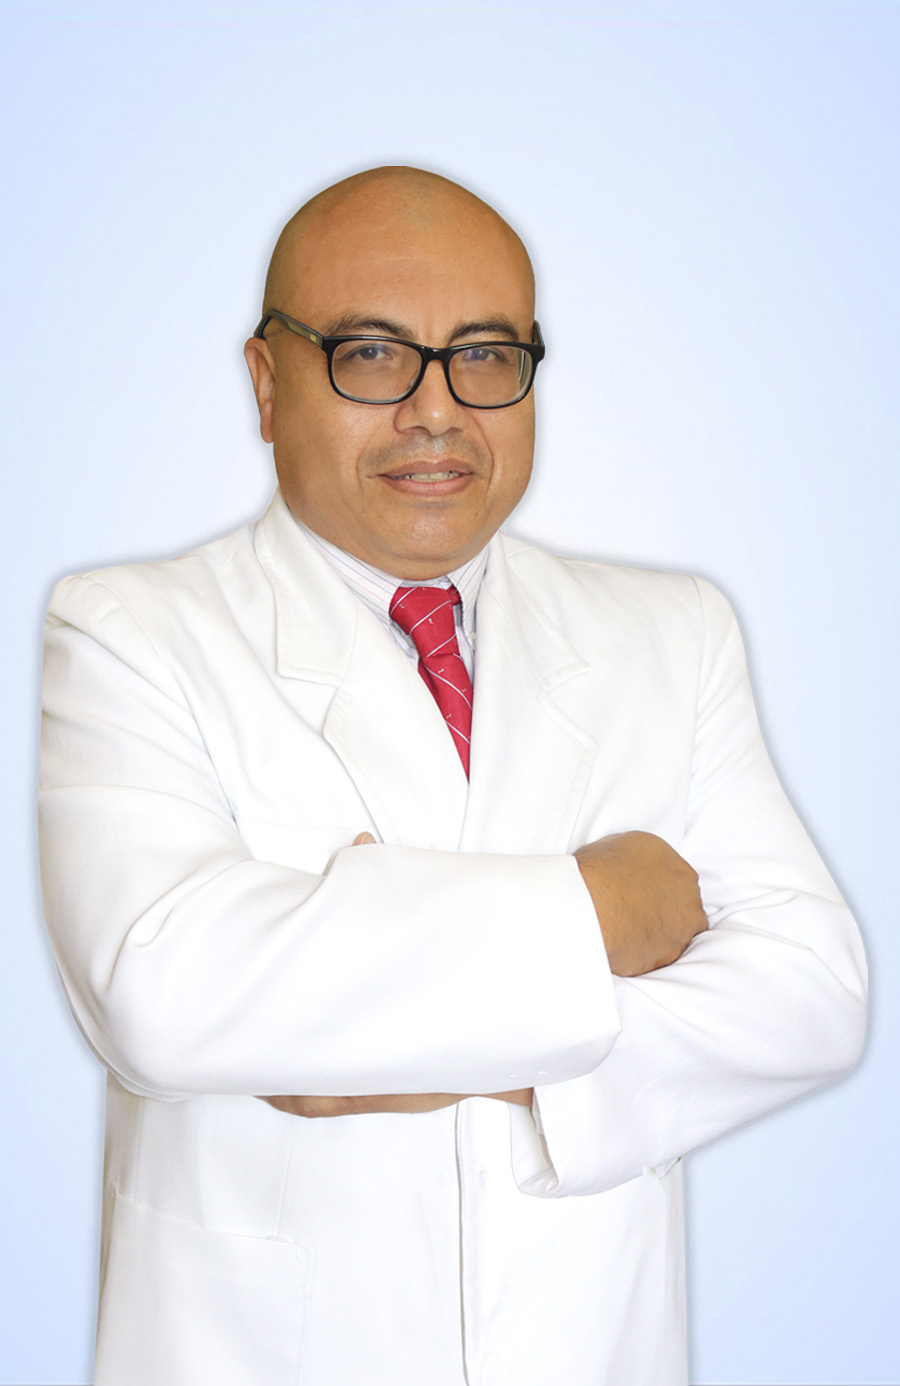 DR. TAPIA